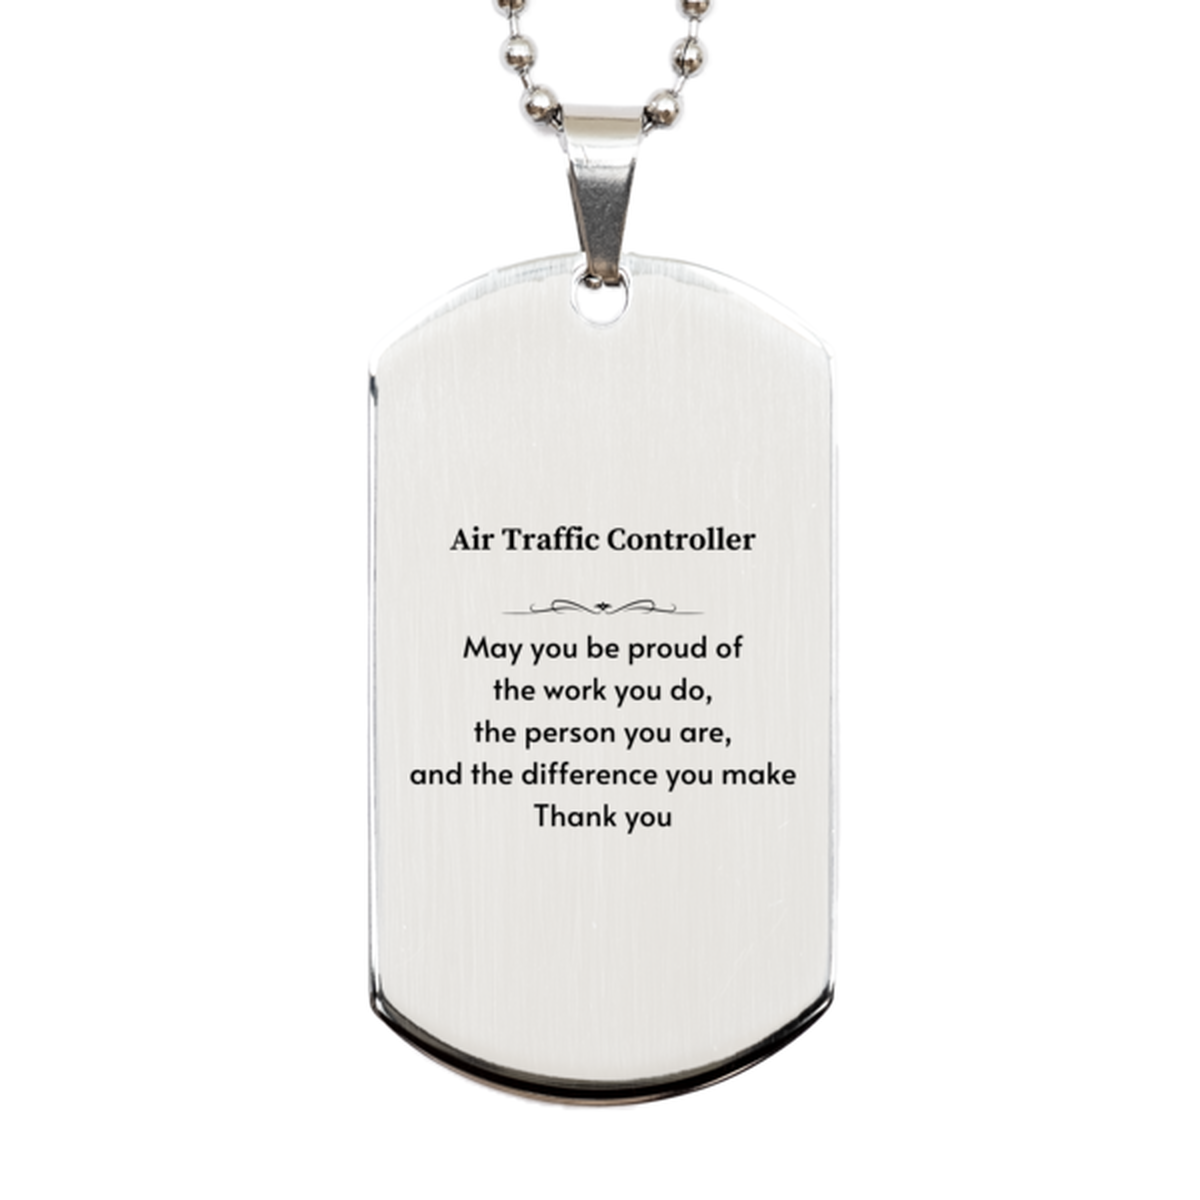 Heartwarming Silver Dog Tag Retirement Coworkers Gifts for Air Traffic Controller, Air Traffic Controller May You be proud of the work you do, the person you are Gifts for Boss Men Women Friends